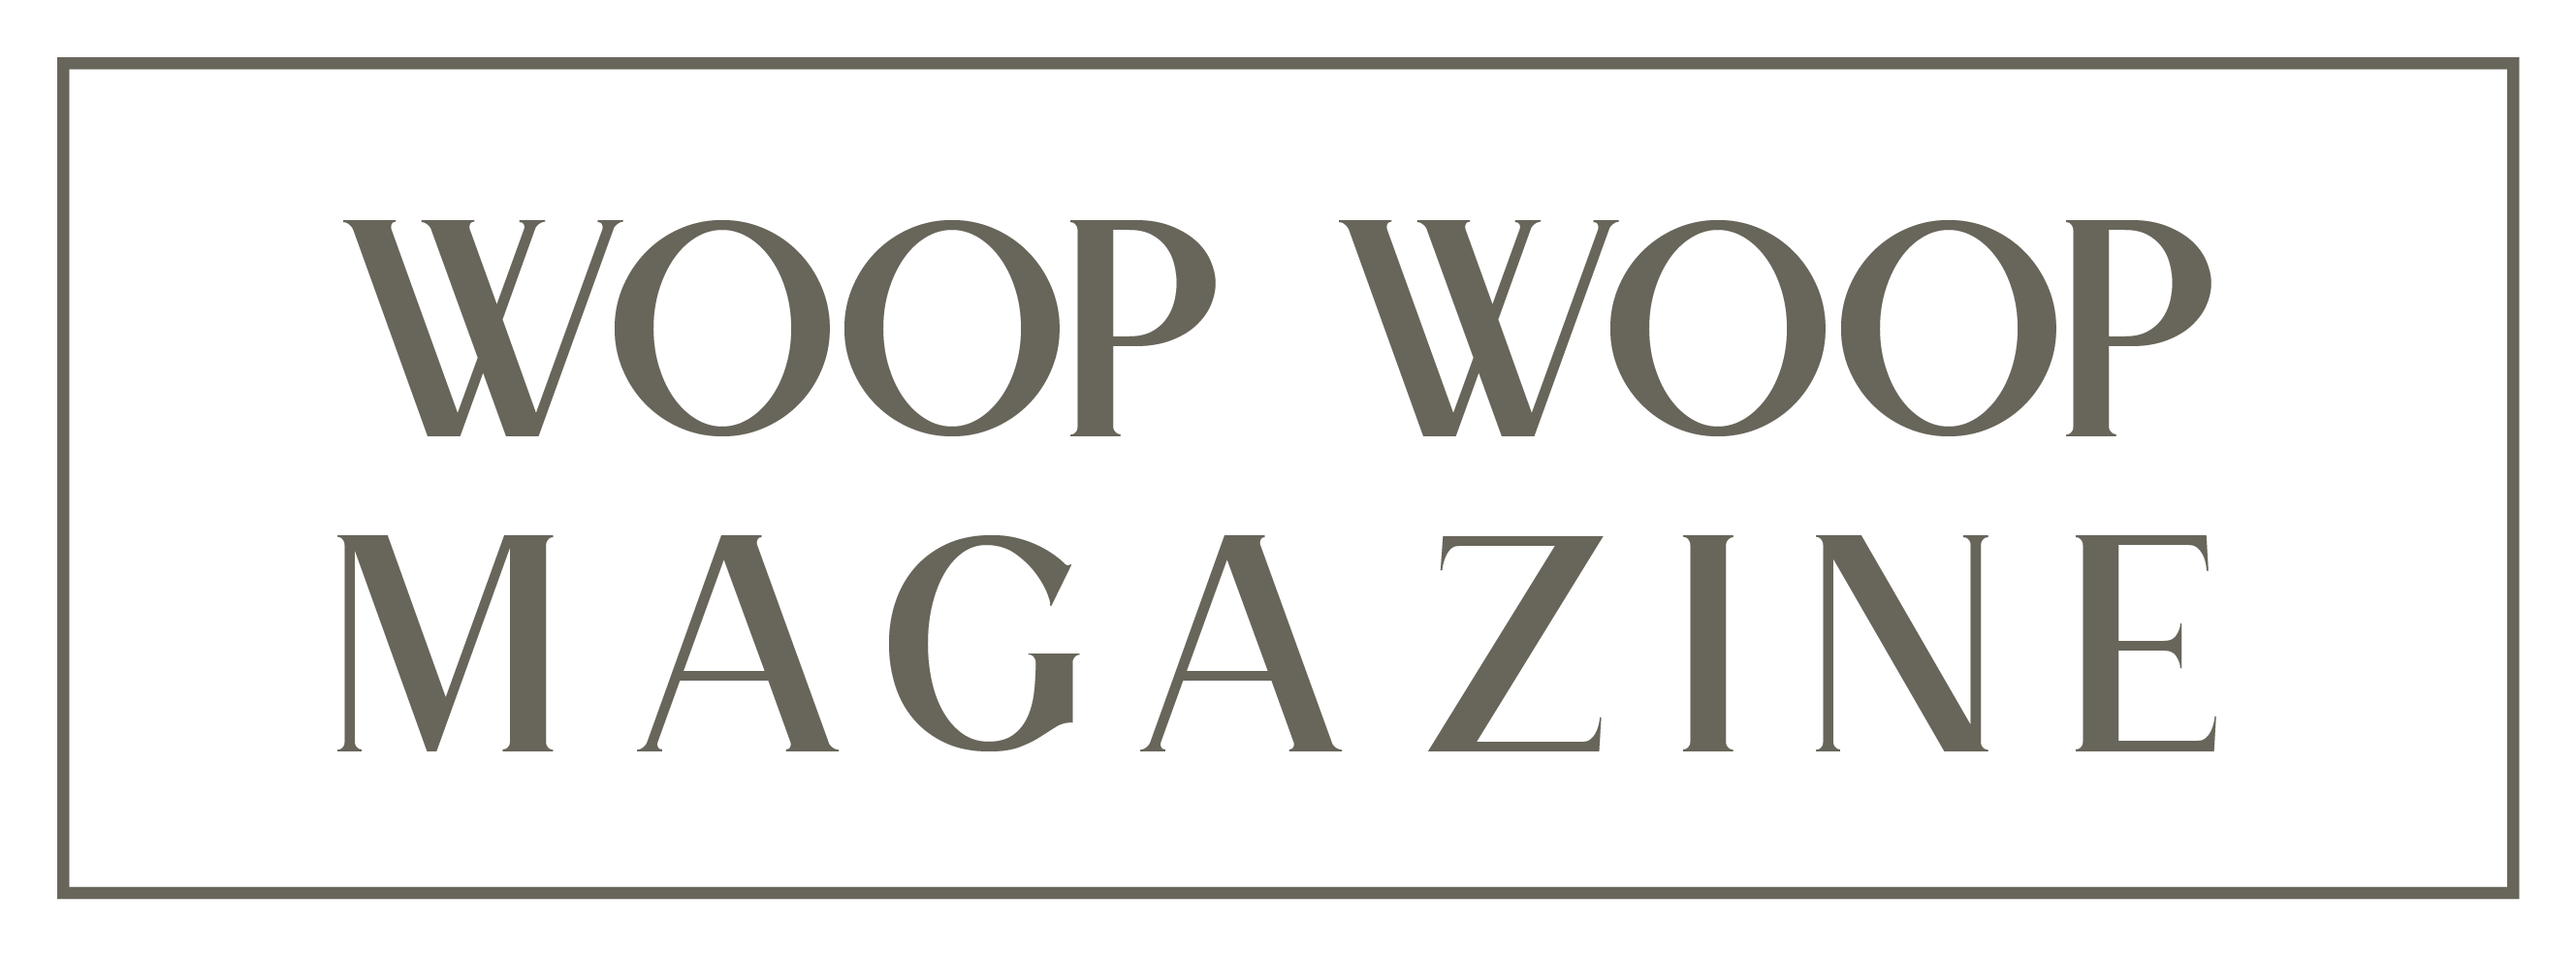 Logo-Woop-woop-magazine-supporters-sustainable-green-earth-ecology-ecosystem-environment-conservation-pollution-world-impact-UK-001